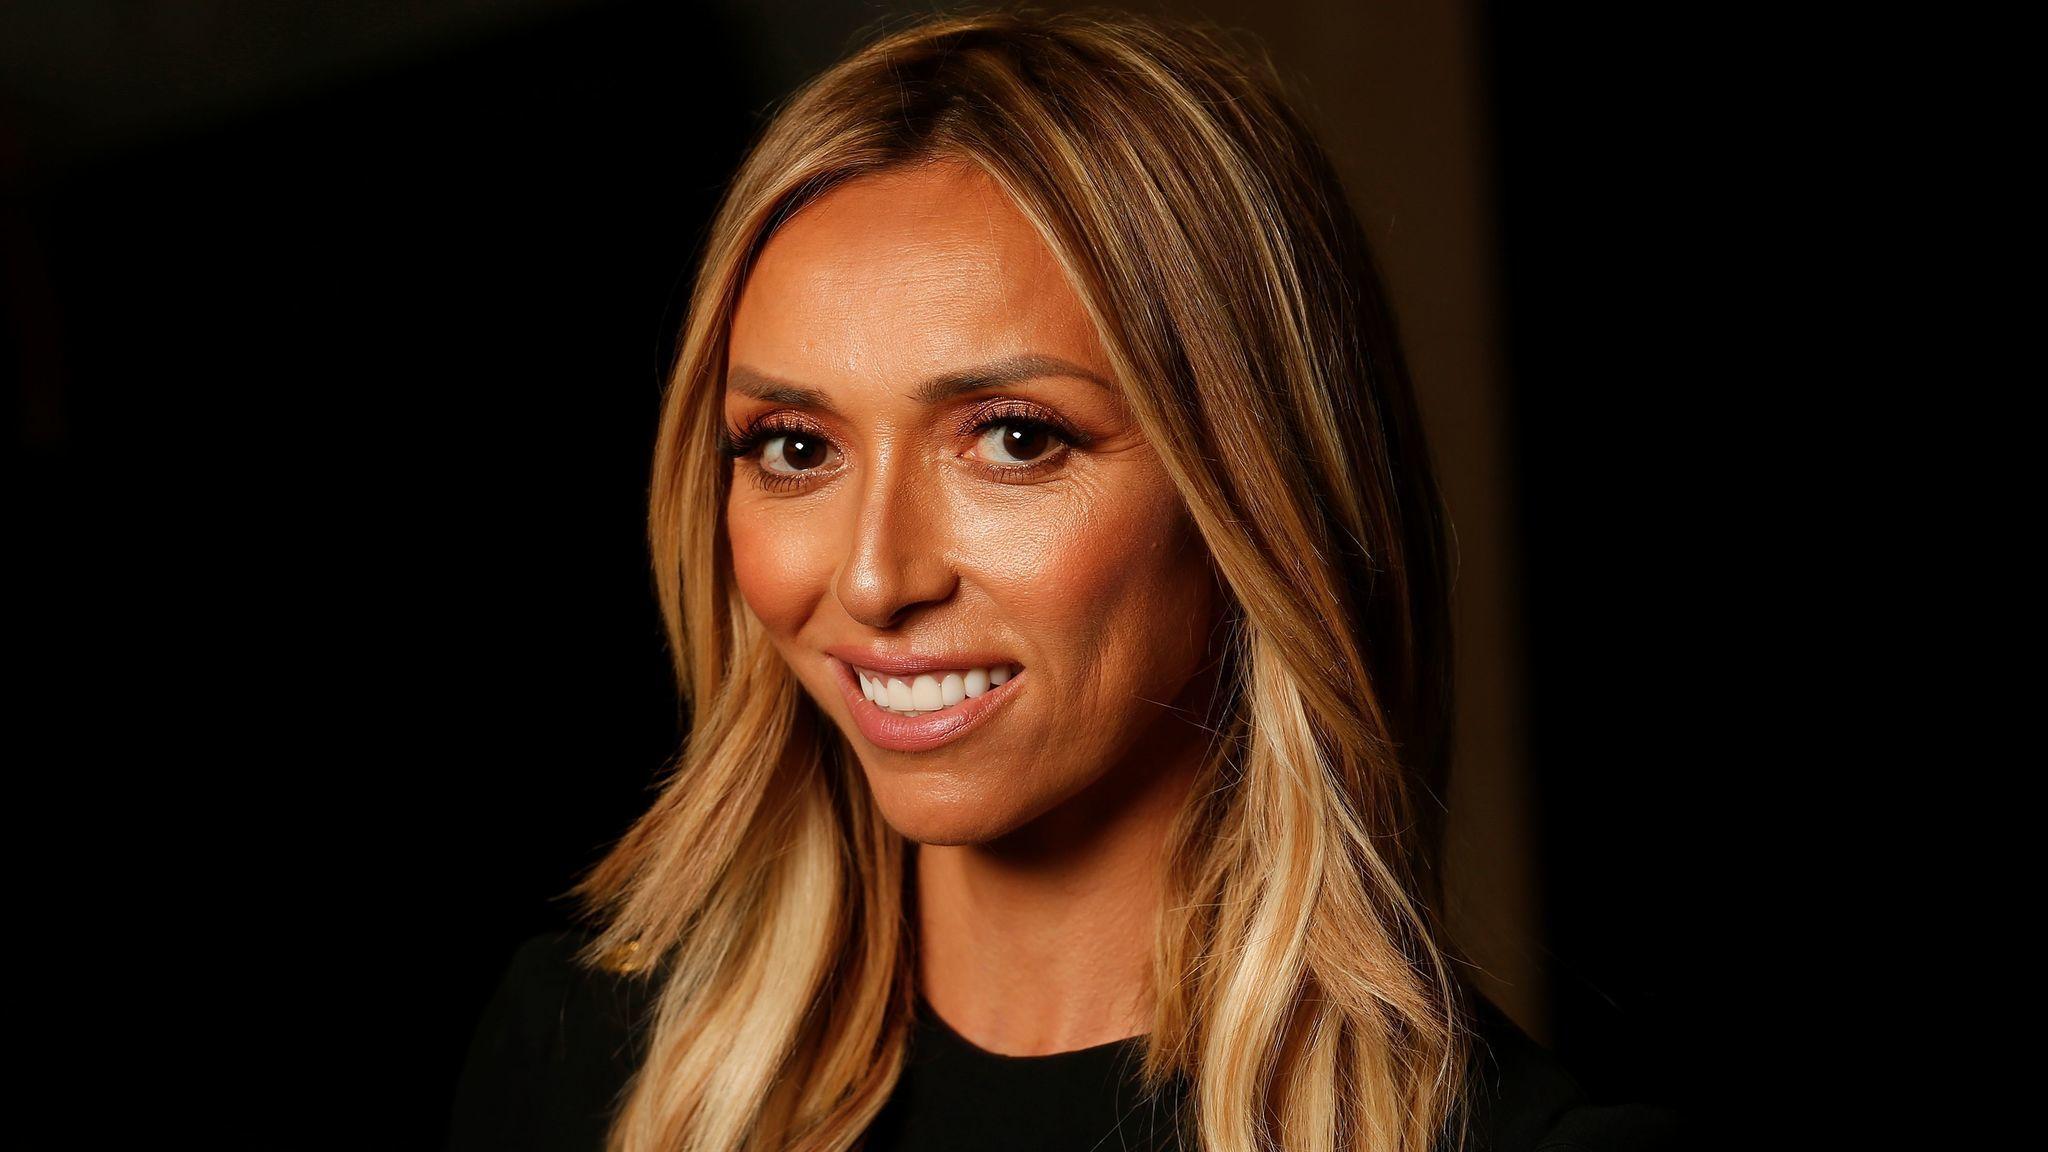 Prosecco is what Giuliana Rancic has on tap